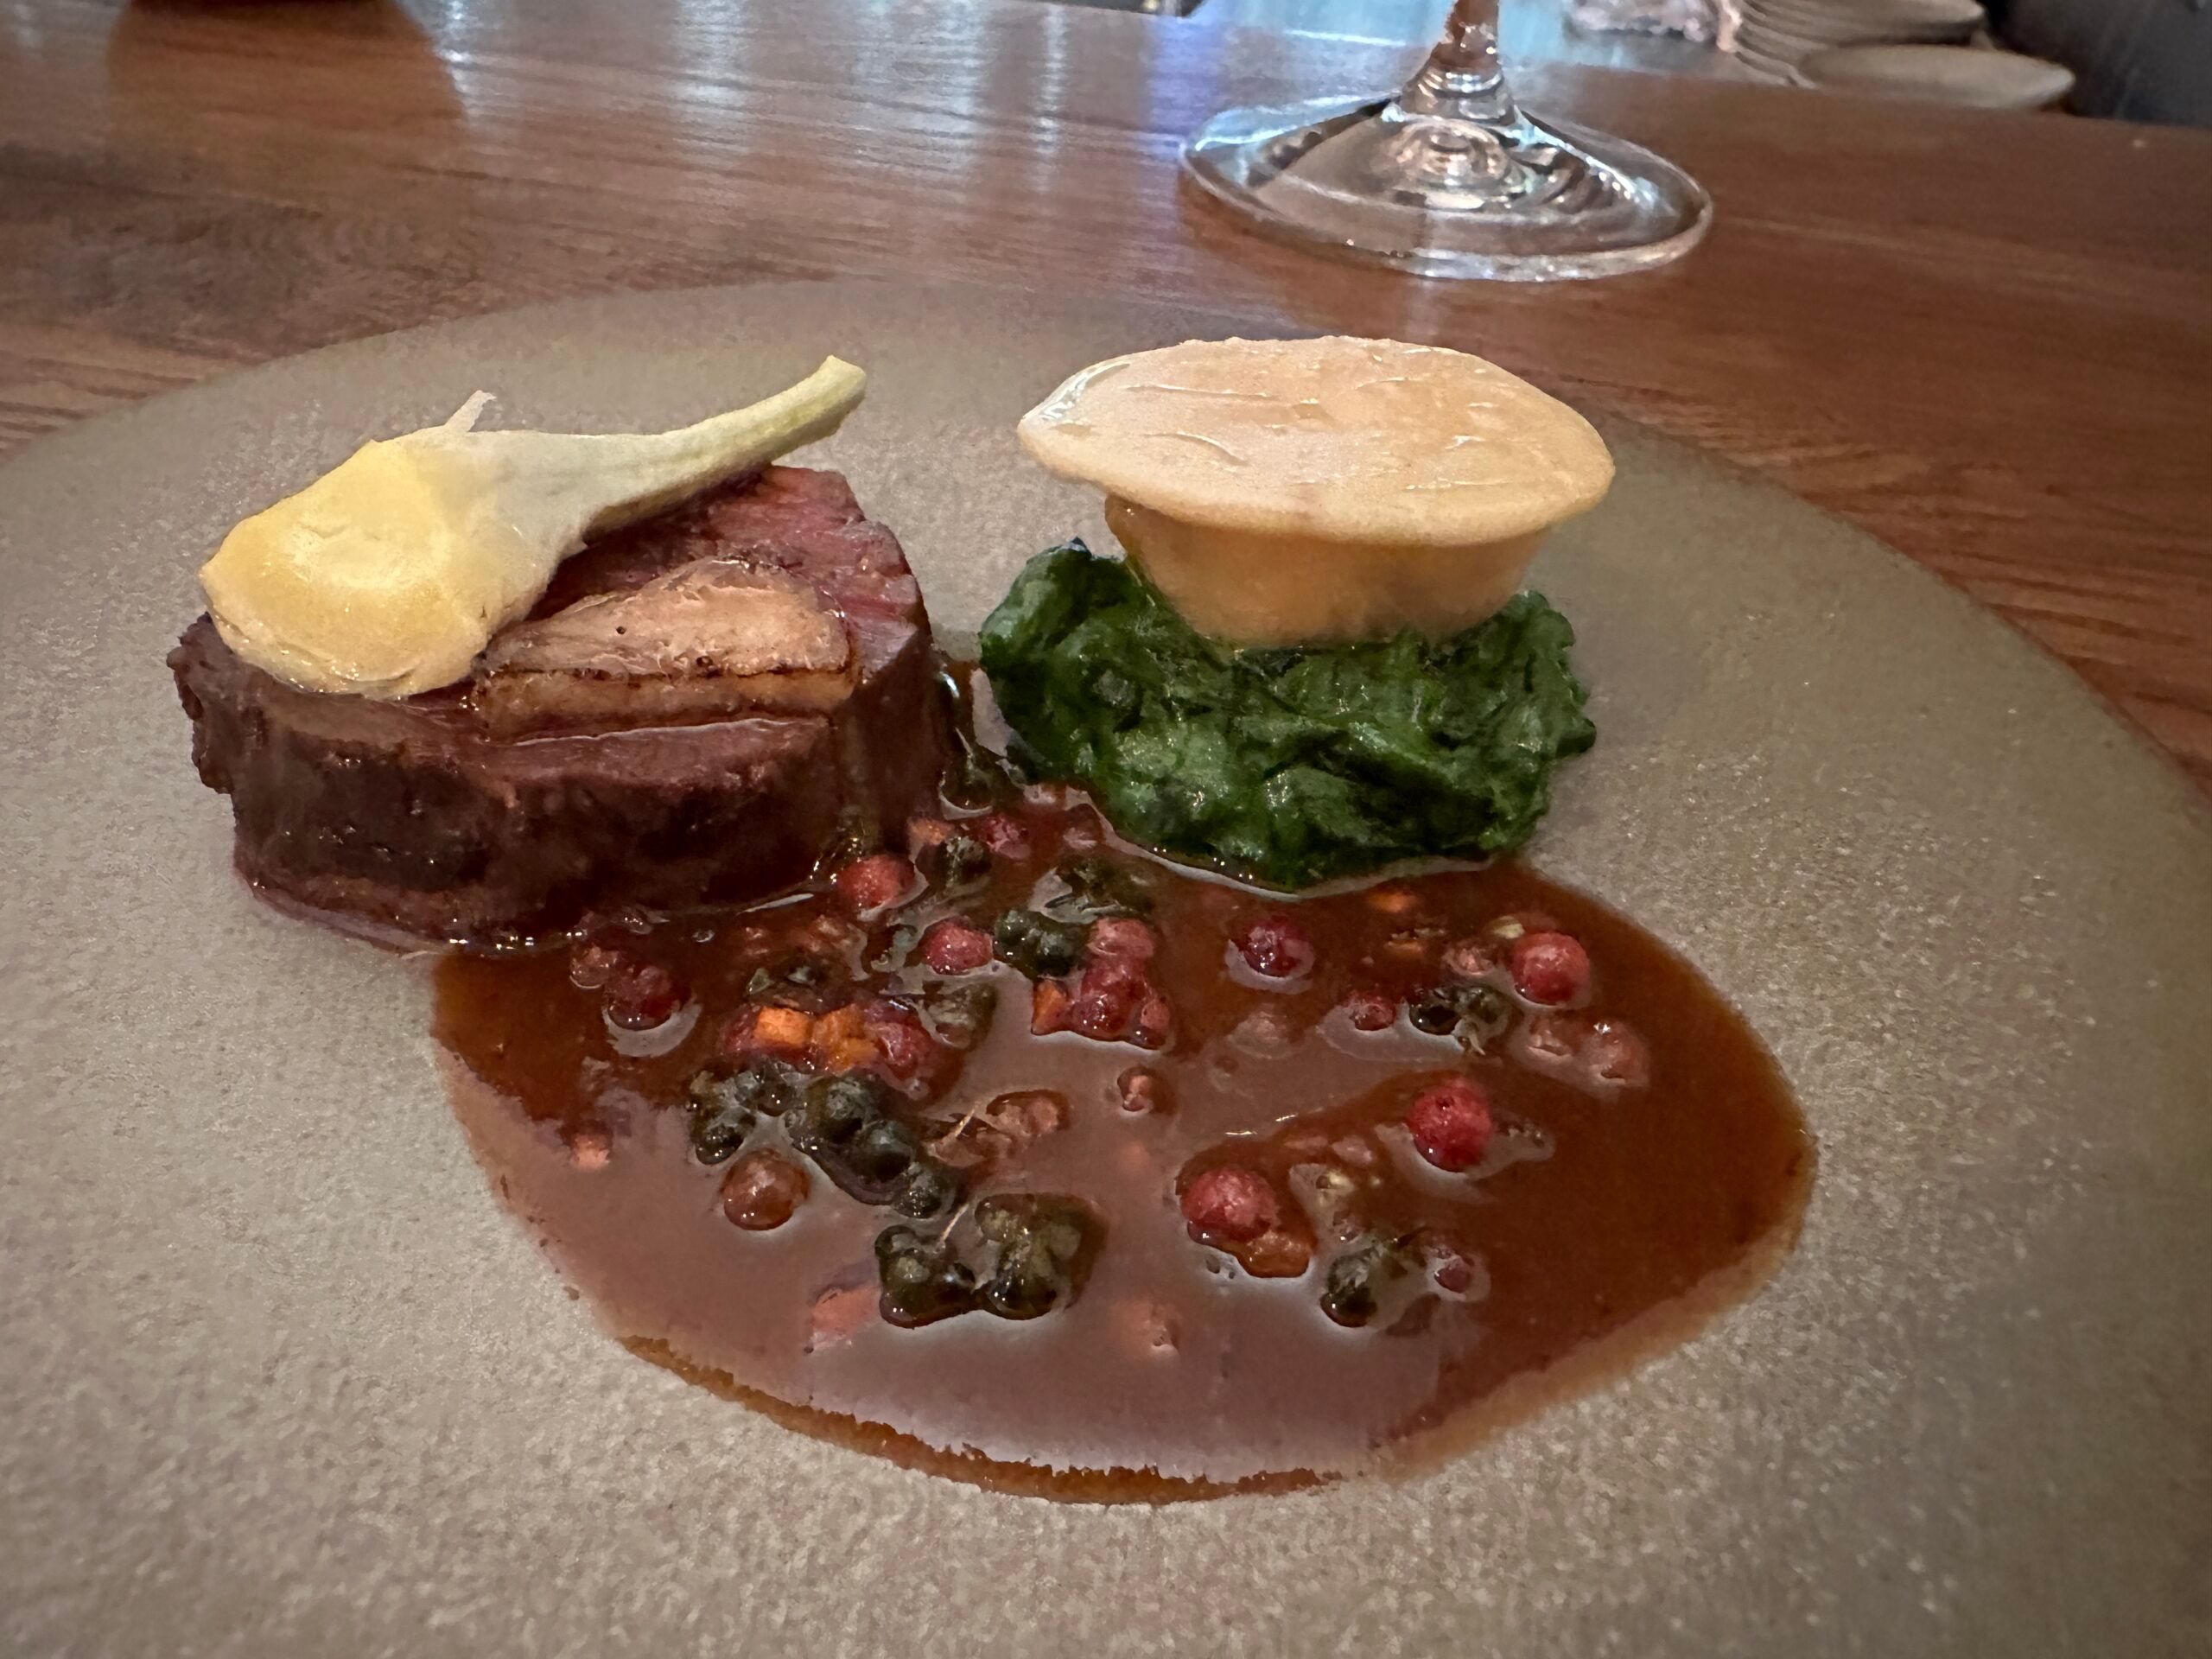 Beef dish with a rich sauce served on a grey plate with a glass in the background.